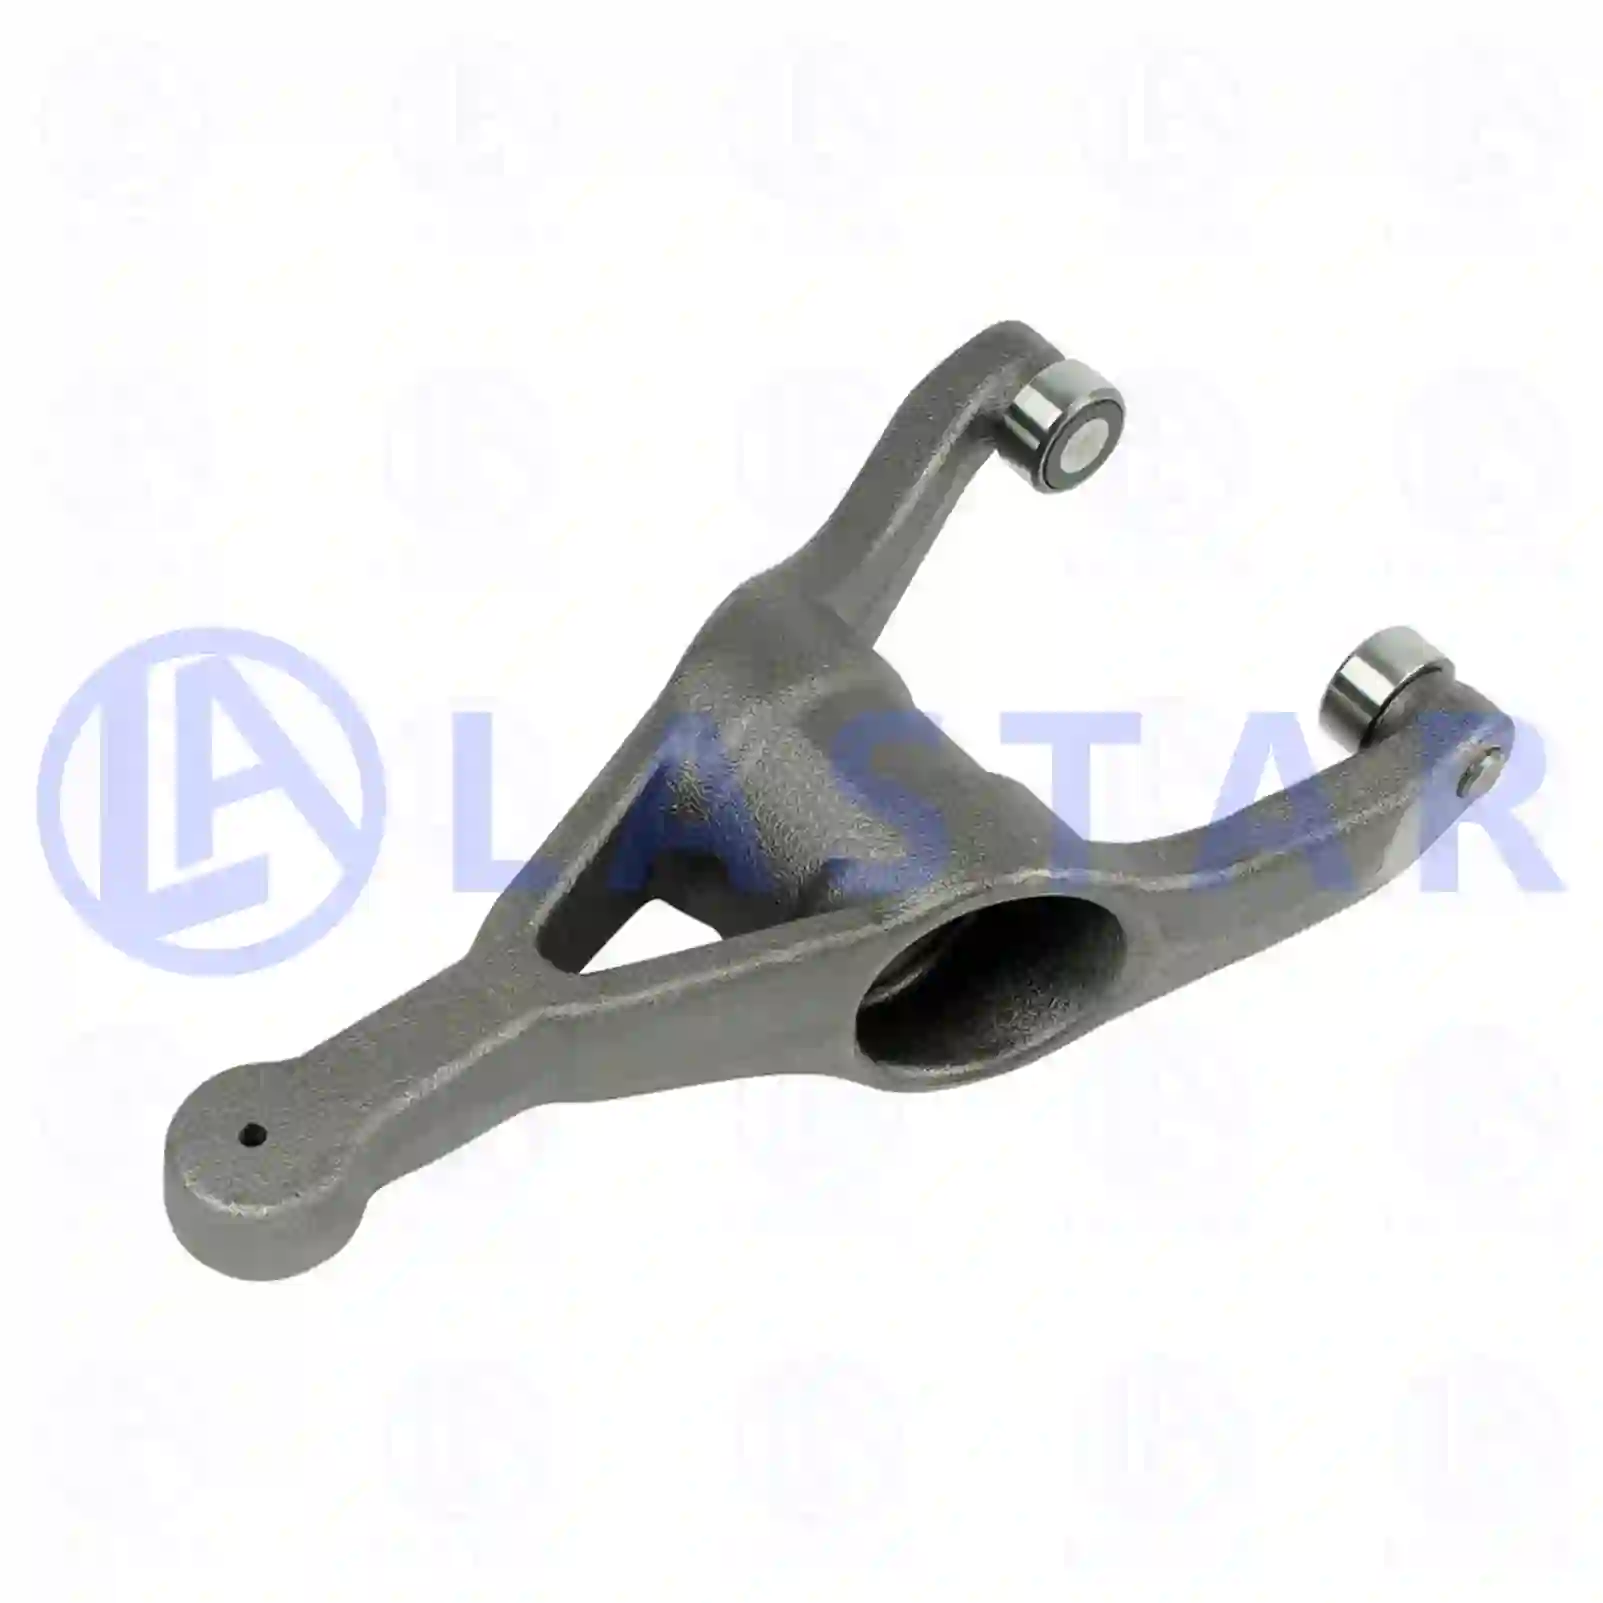 Release fork, 77722406, 6552501513, ZG30362-0008 ||  77722406 Lastar Spare Part | Truck Spare Parts, Auotomotive Spare Parts Release fork, 77722406, 6552501513, ZG30362-0008 ||  77722406 Lastar Spare Part | Truck Spare Parts, Auotomotive Spare Parts